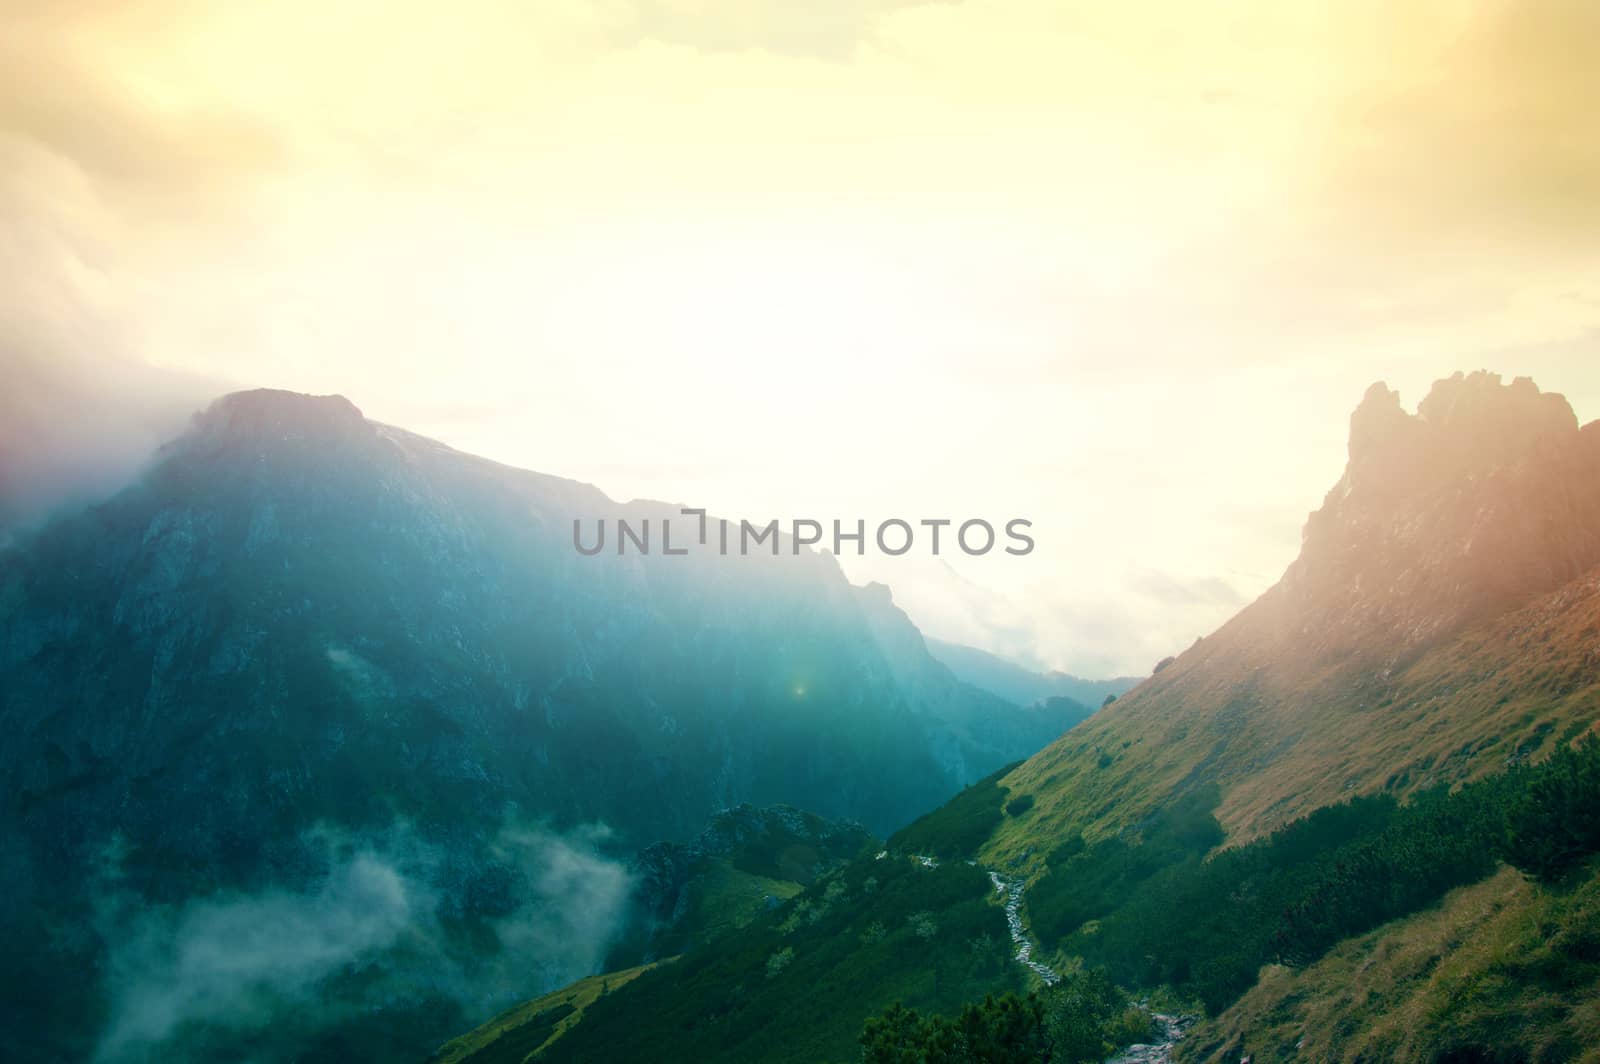 Fog in mountains. Fantasy and colorfull nature landscape. Nature conceptual image.